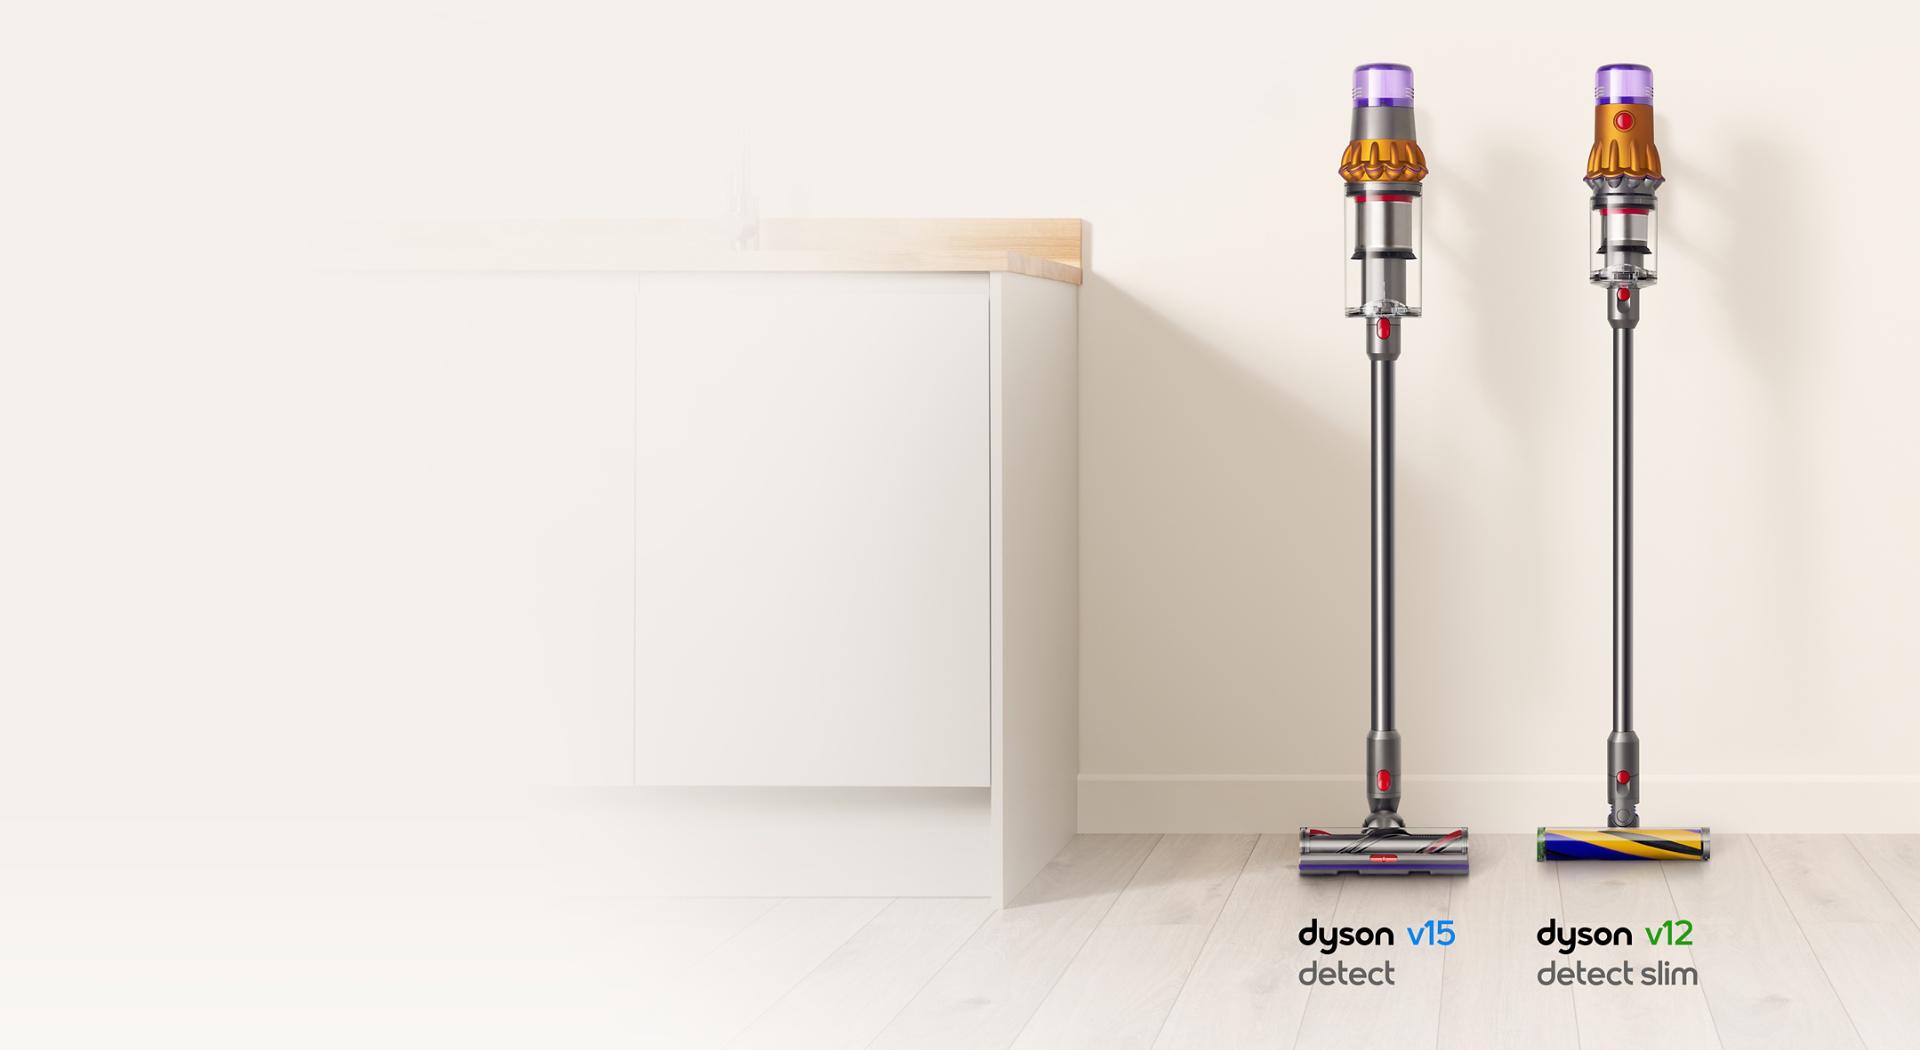 Dyson V15 Detect and Dyson V12 Detect Slim vacuums side by side